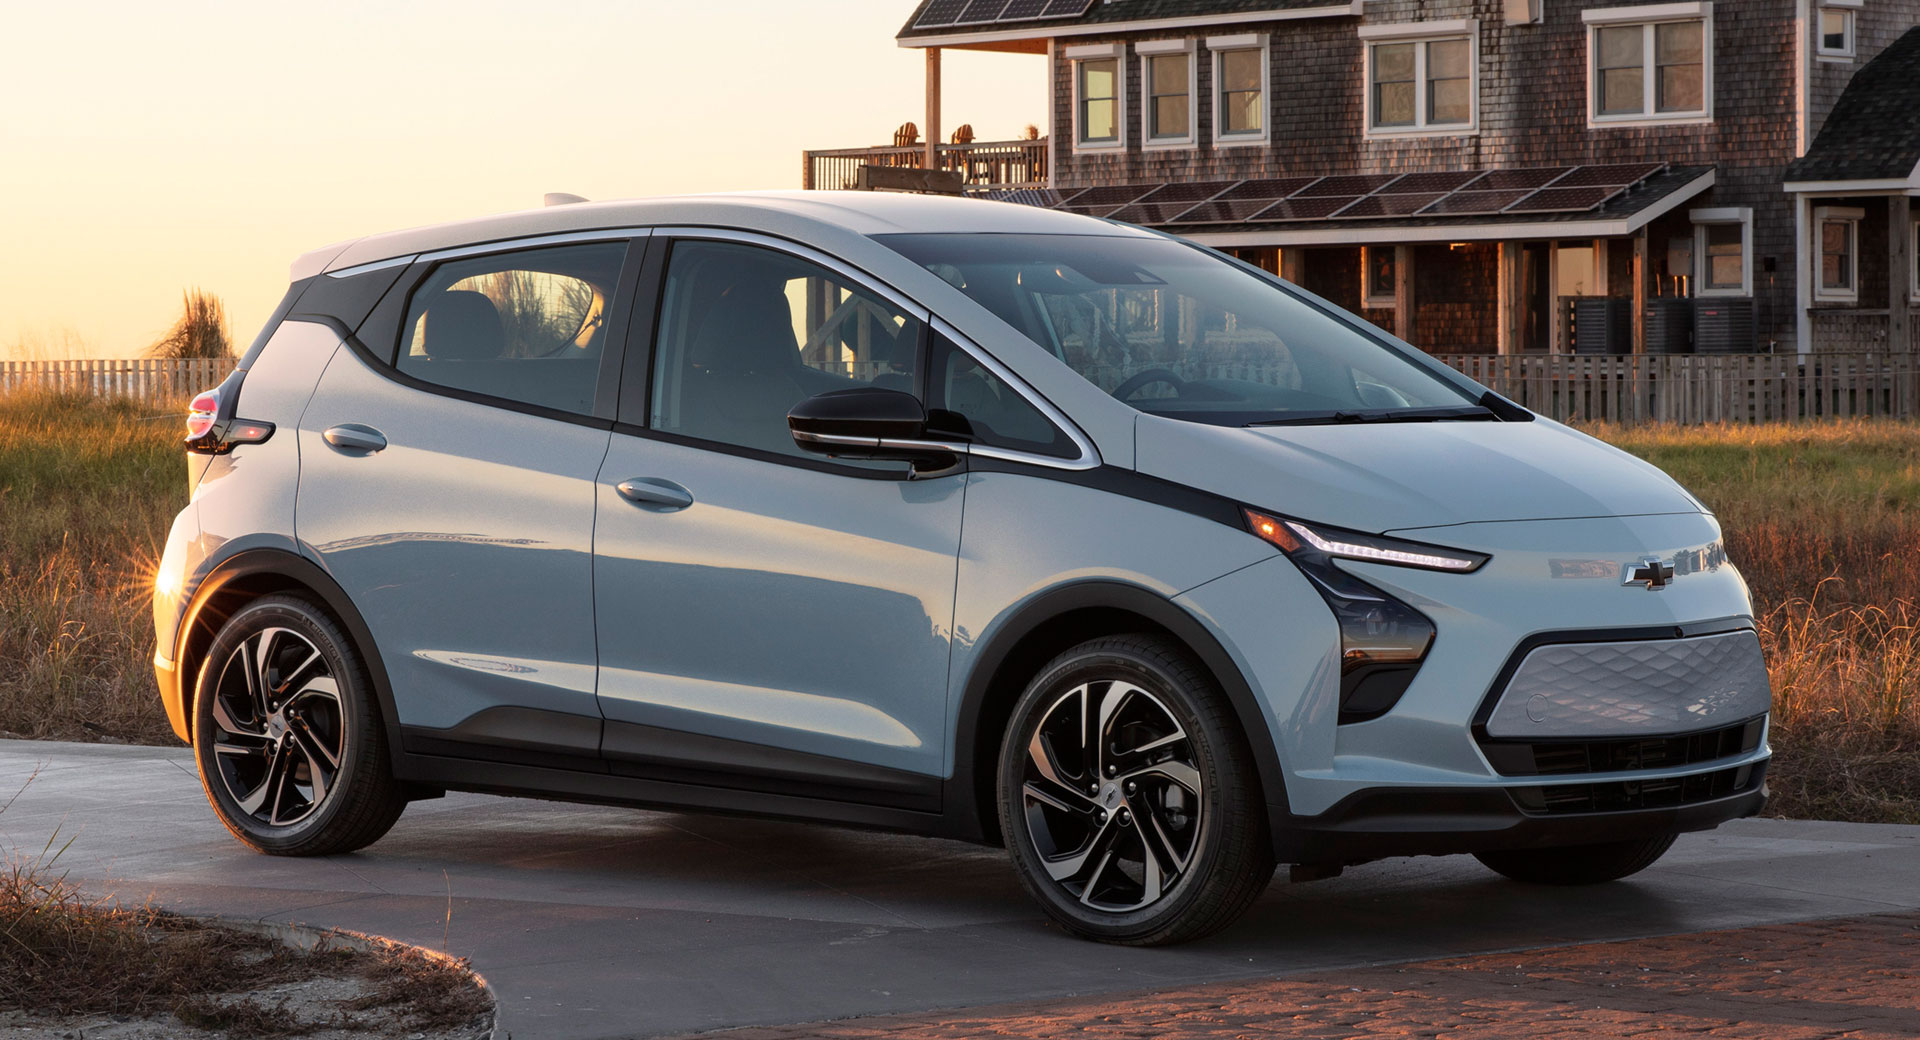 Chevy Bolt Getting A Reprieve? NextGen Model Reportedly Coming In 35